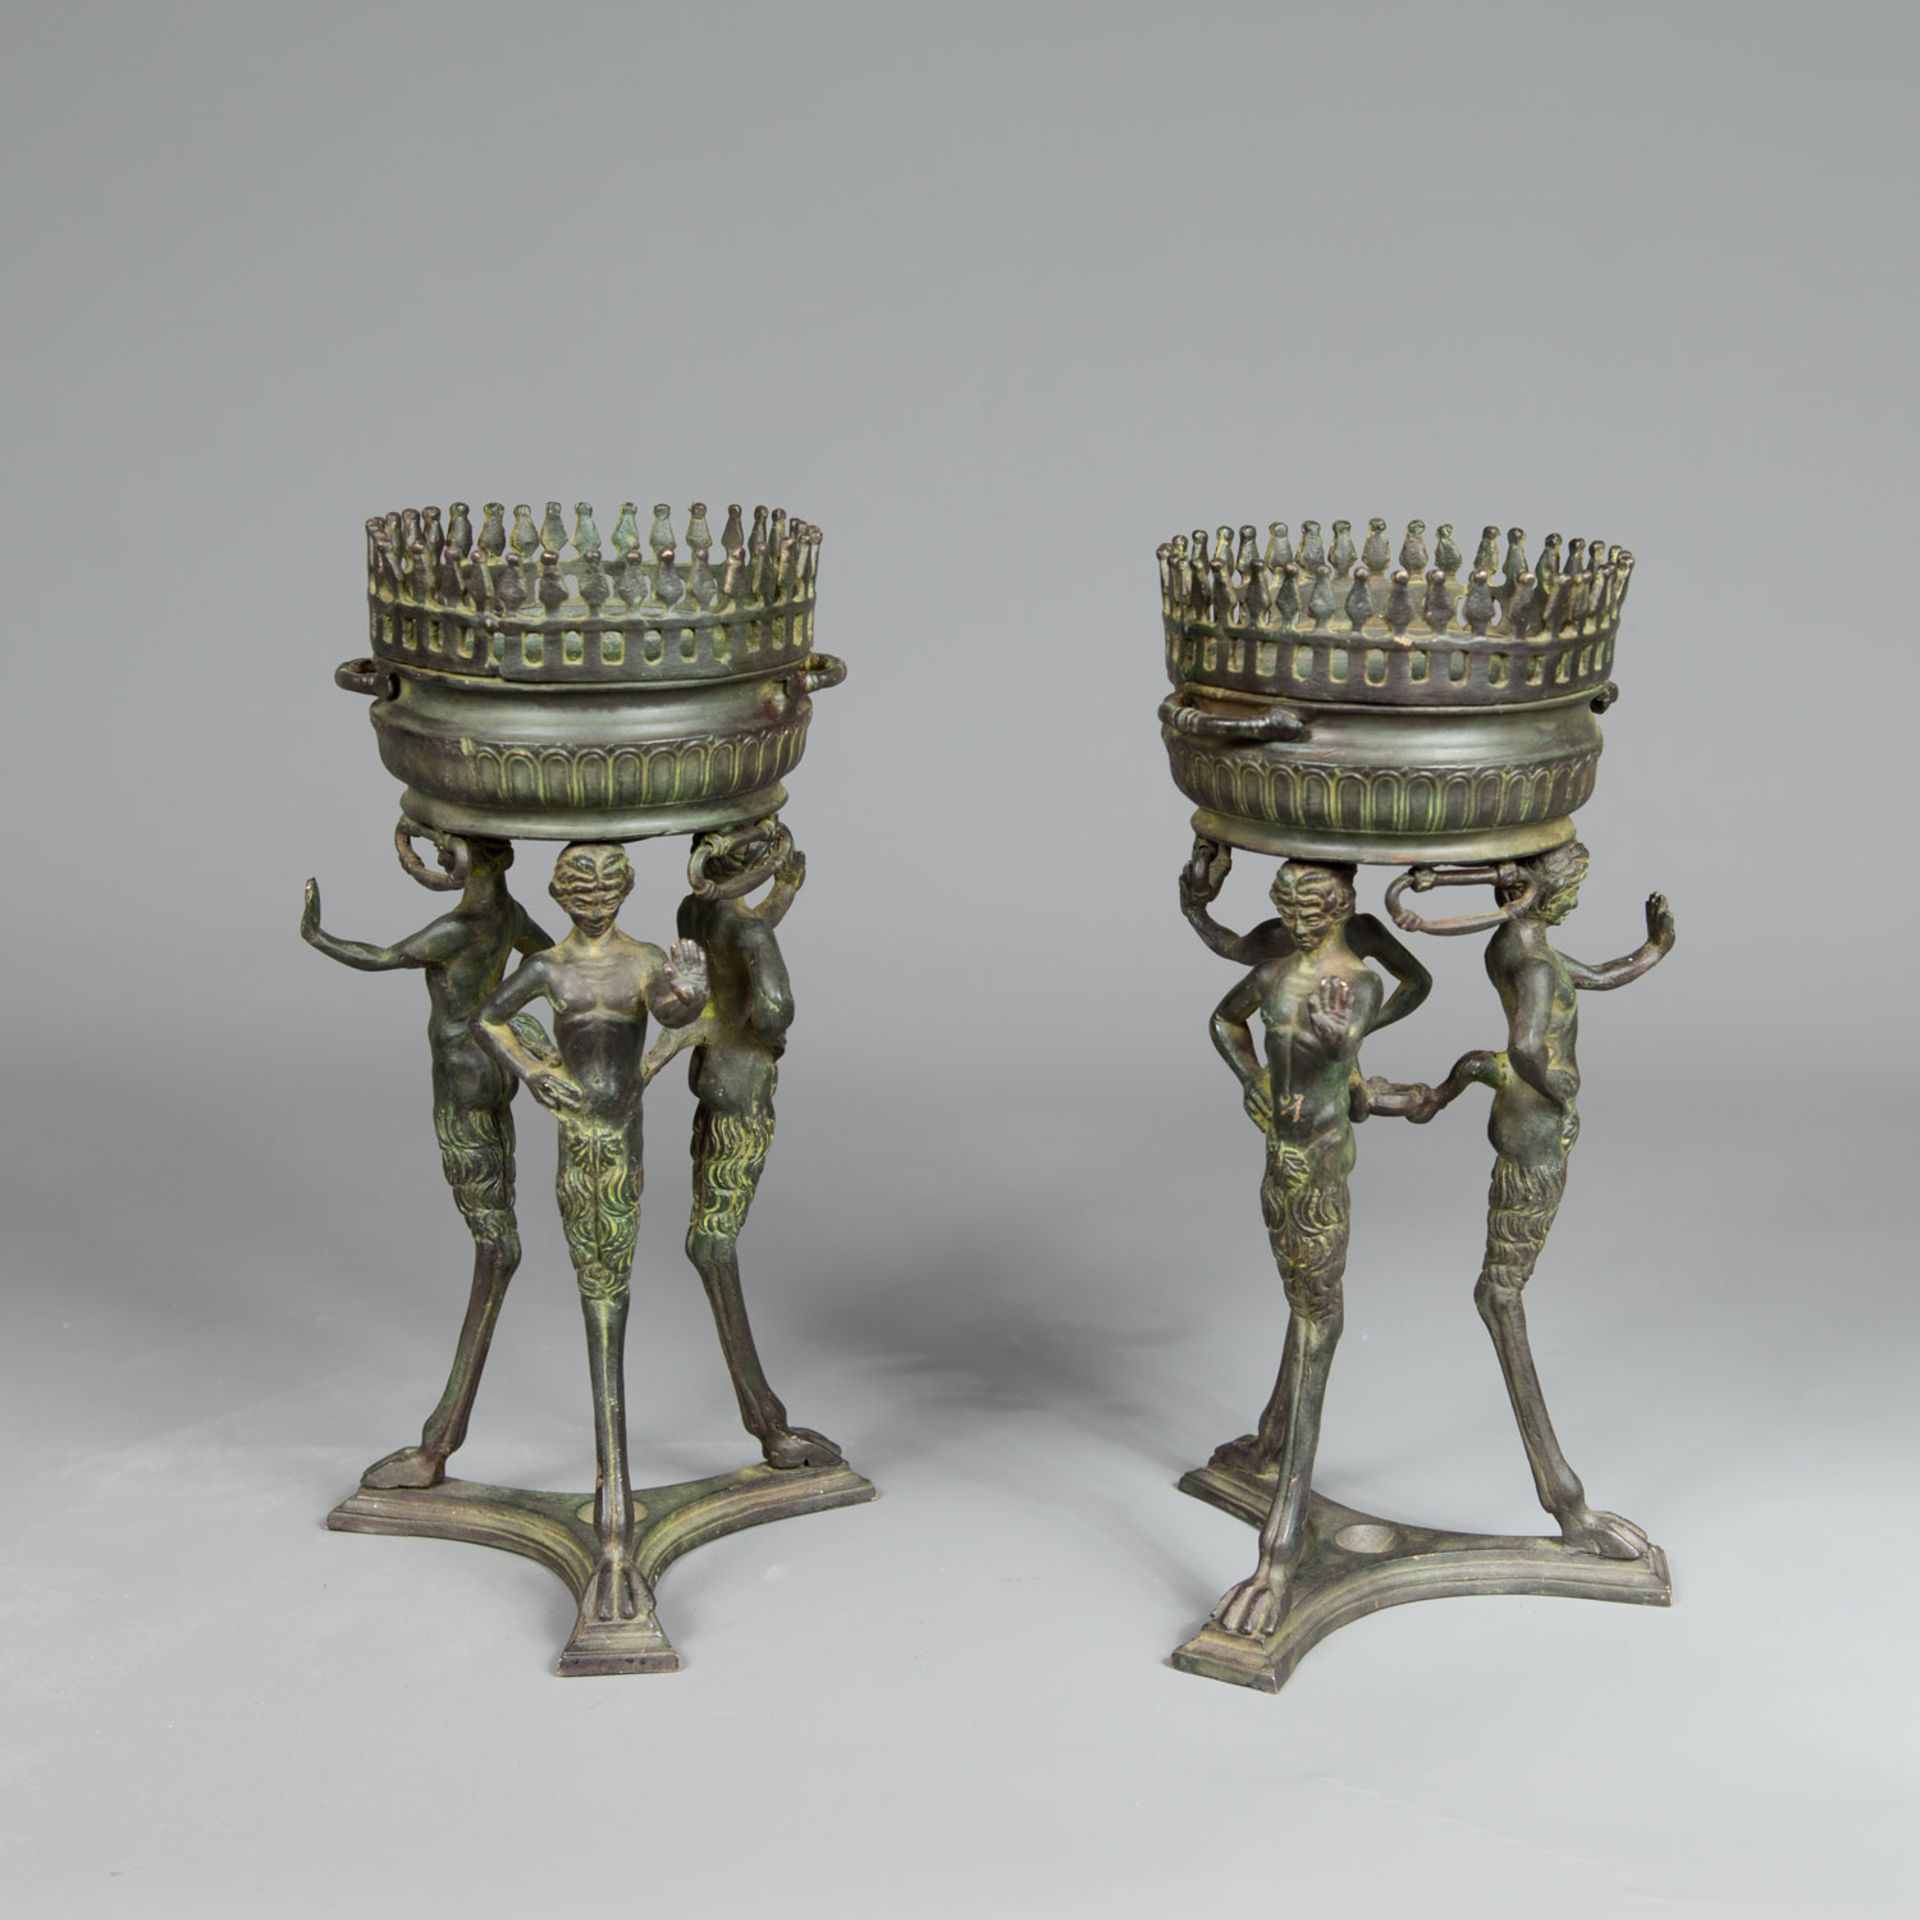 Pair of Pompeian tazzas after the Ancients